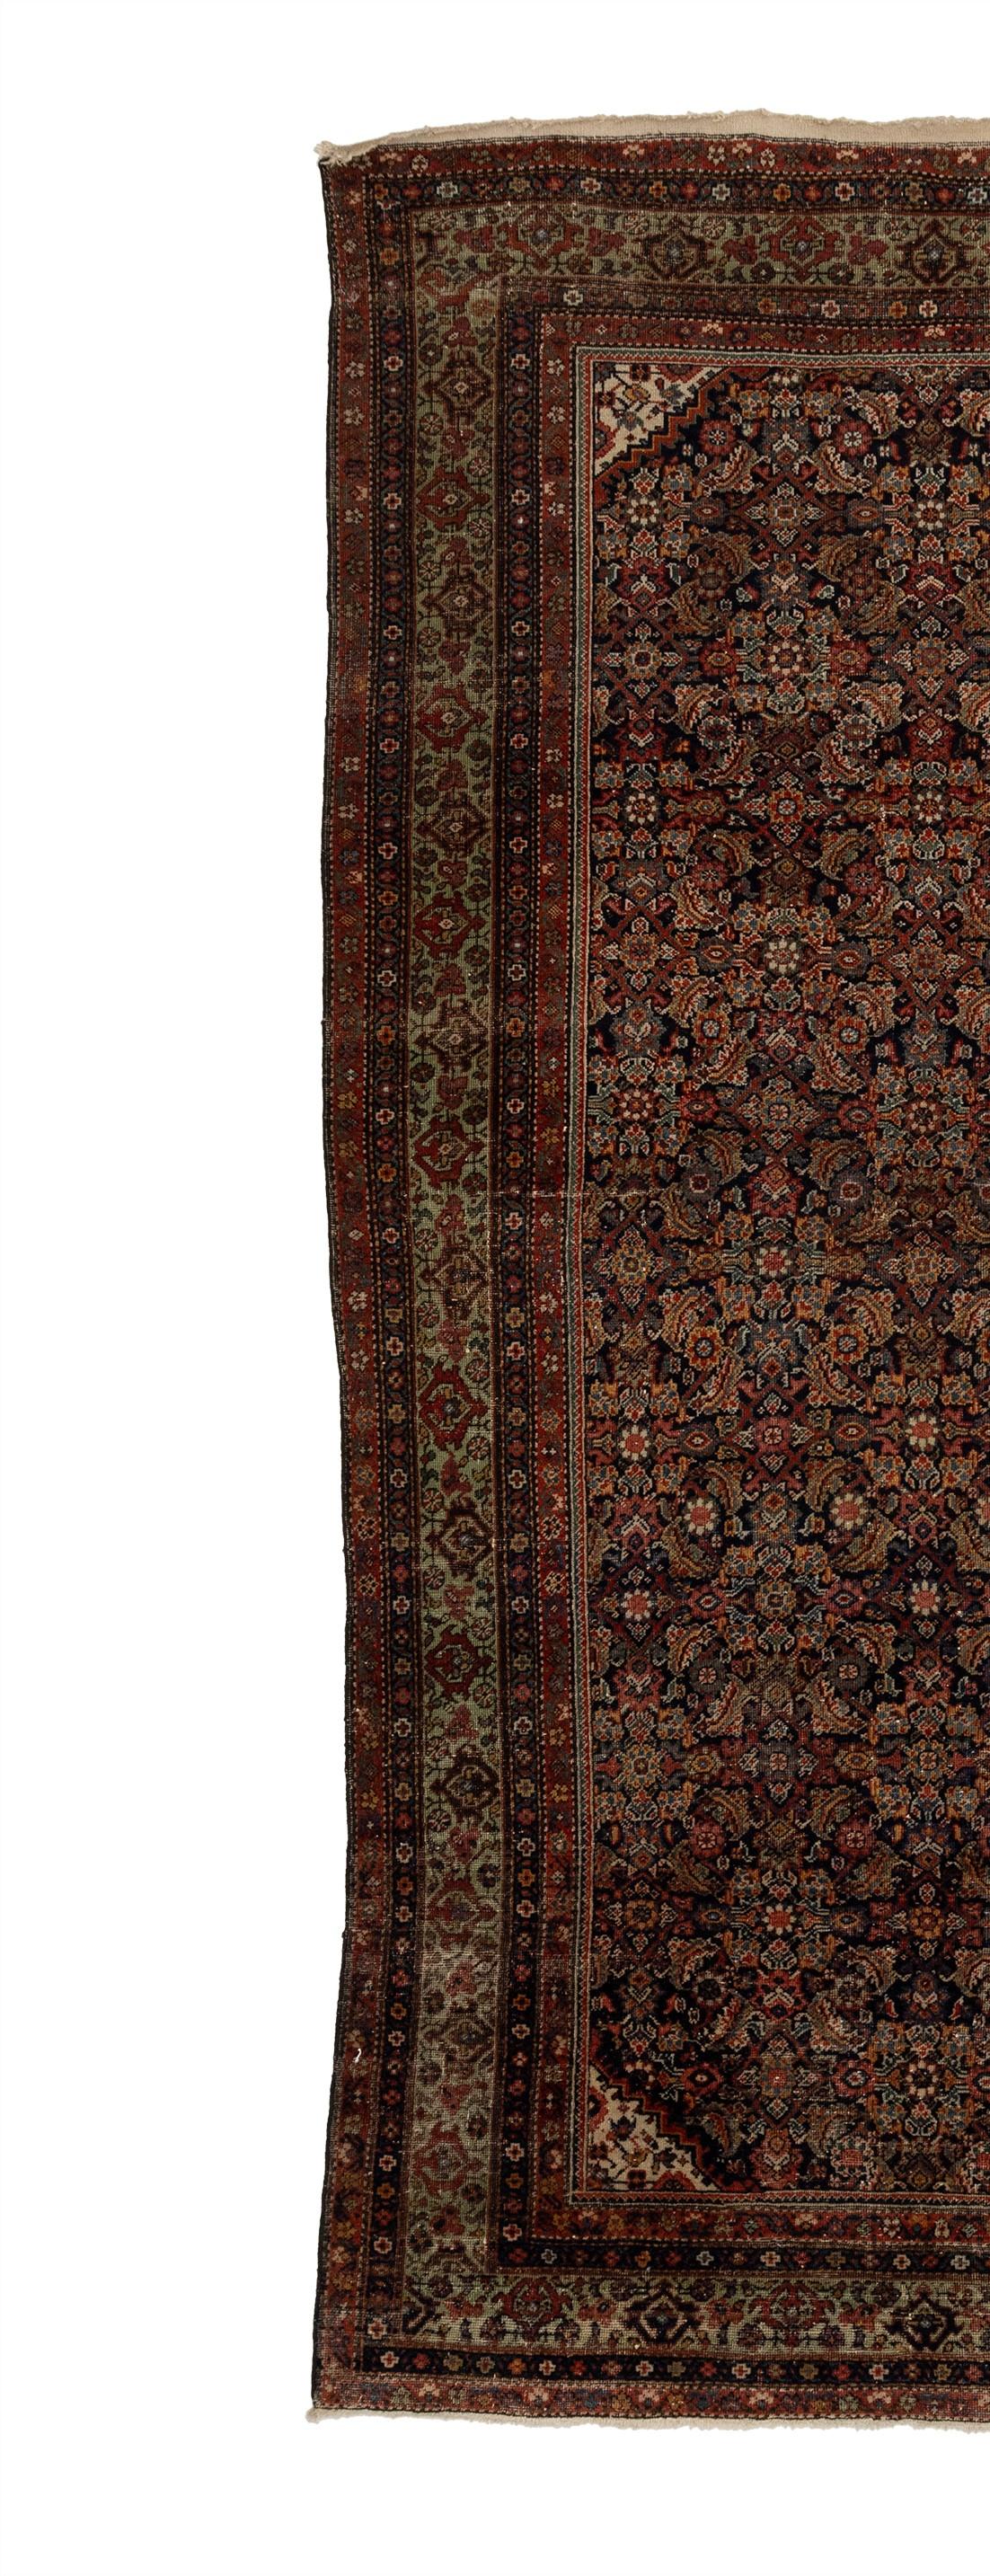 This Vintage Oriental rug is a genuine work of art, made with precision and care using only the highest quality materials. The intricate patterns and flawless craftsmanship showcase the incredible skill and creativity poured into each rug. Its